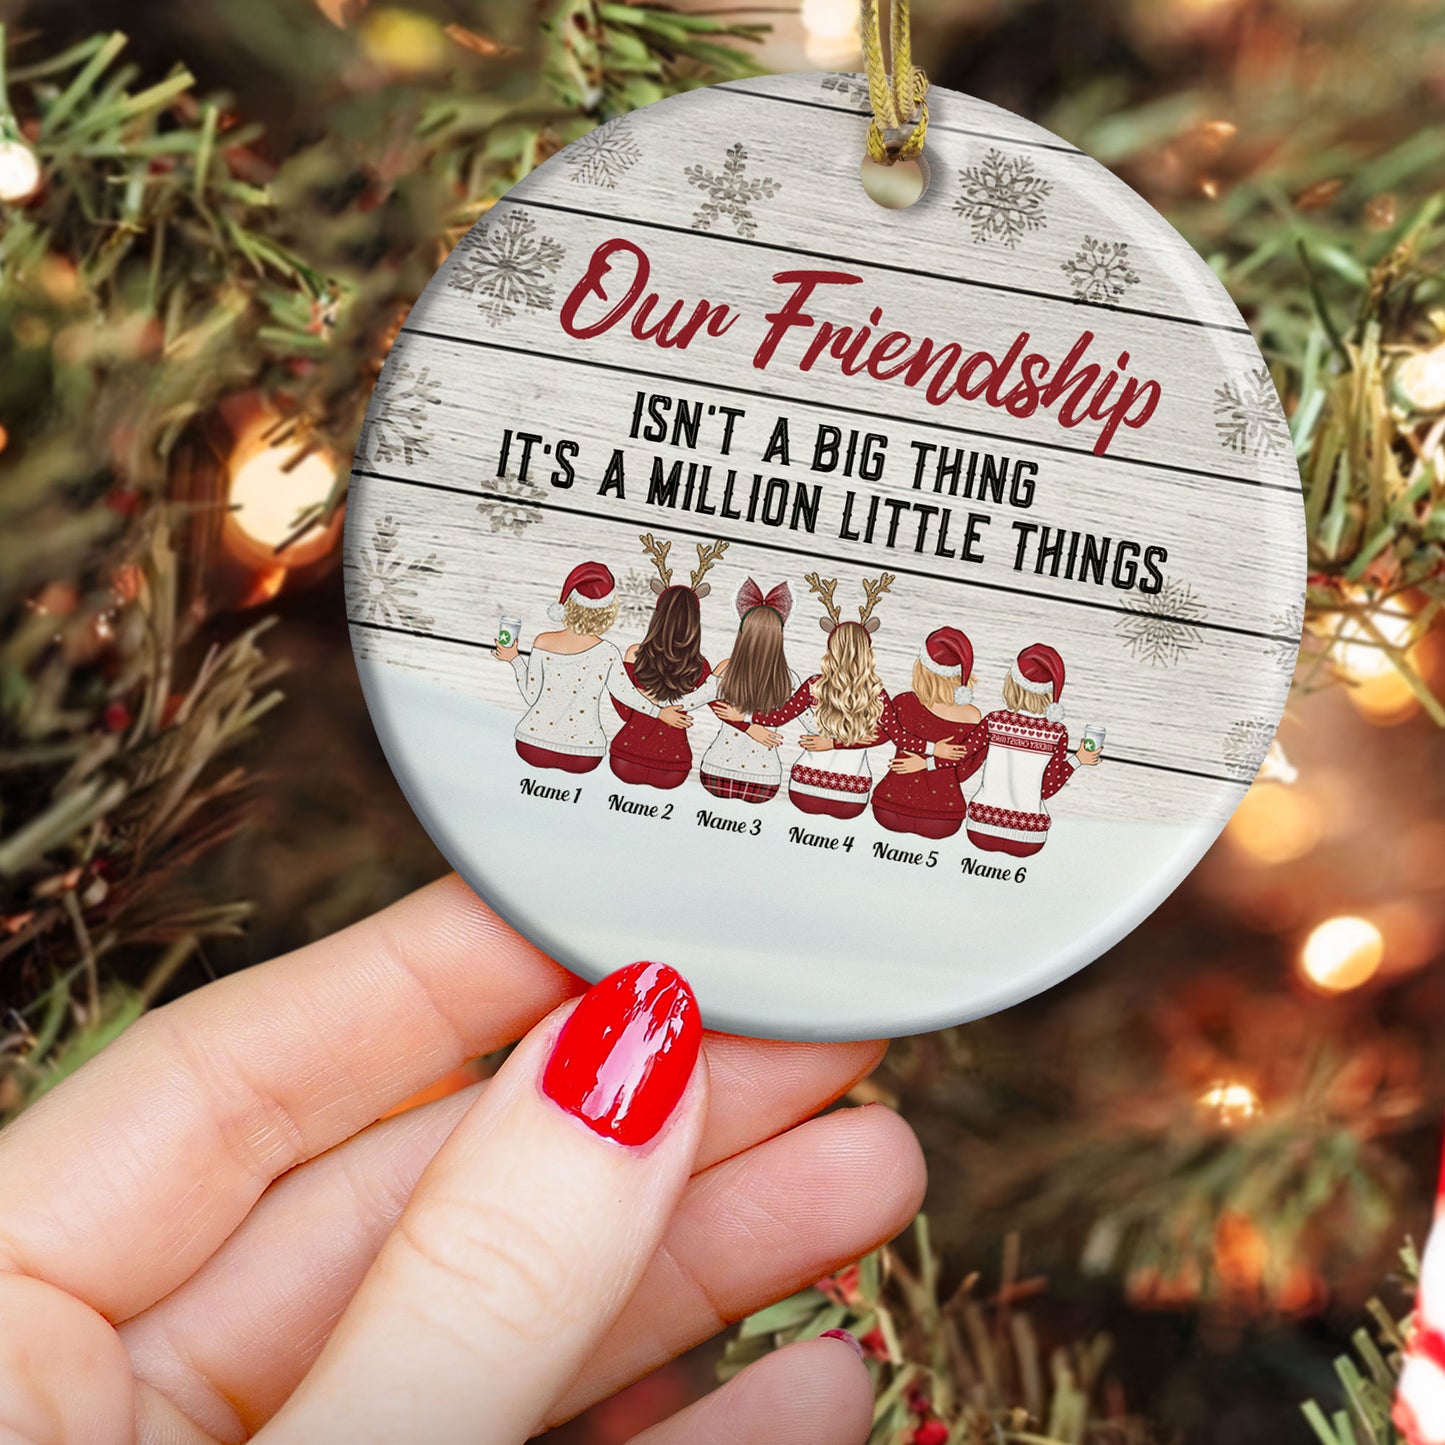 Our Friendship This Christmas - Personalized Ceramic Ornament - Christmas Gift For Besties, Best Friends, BFF